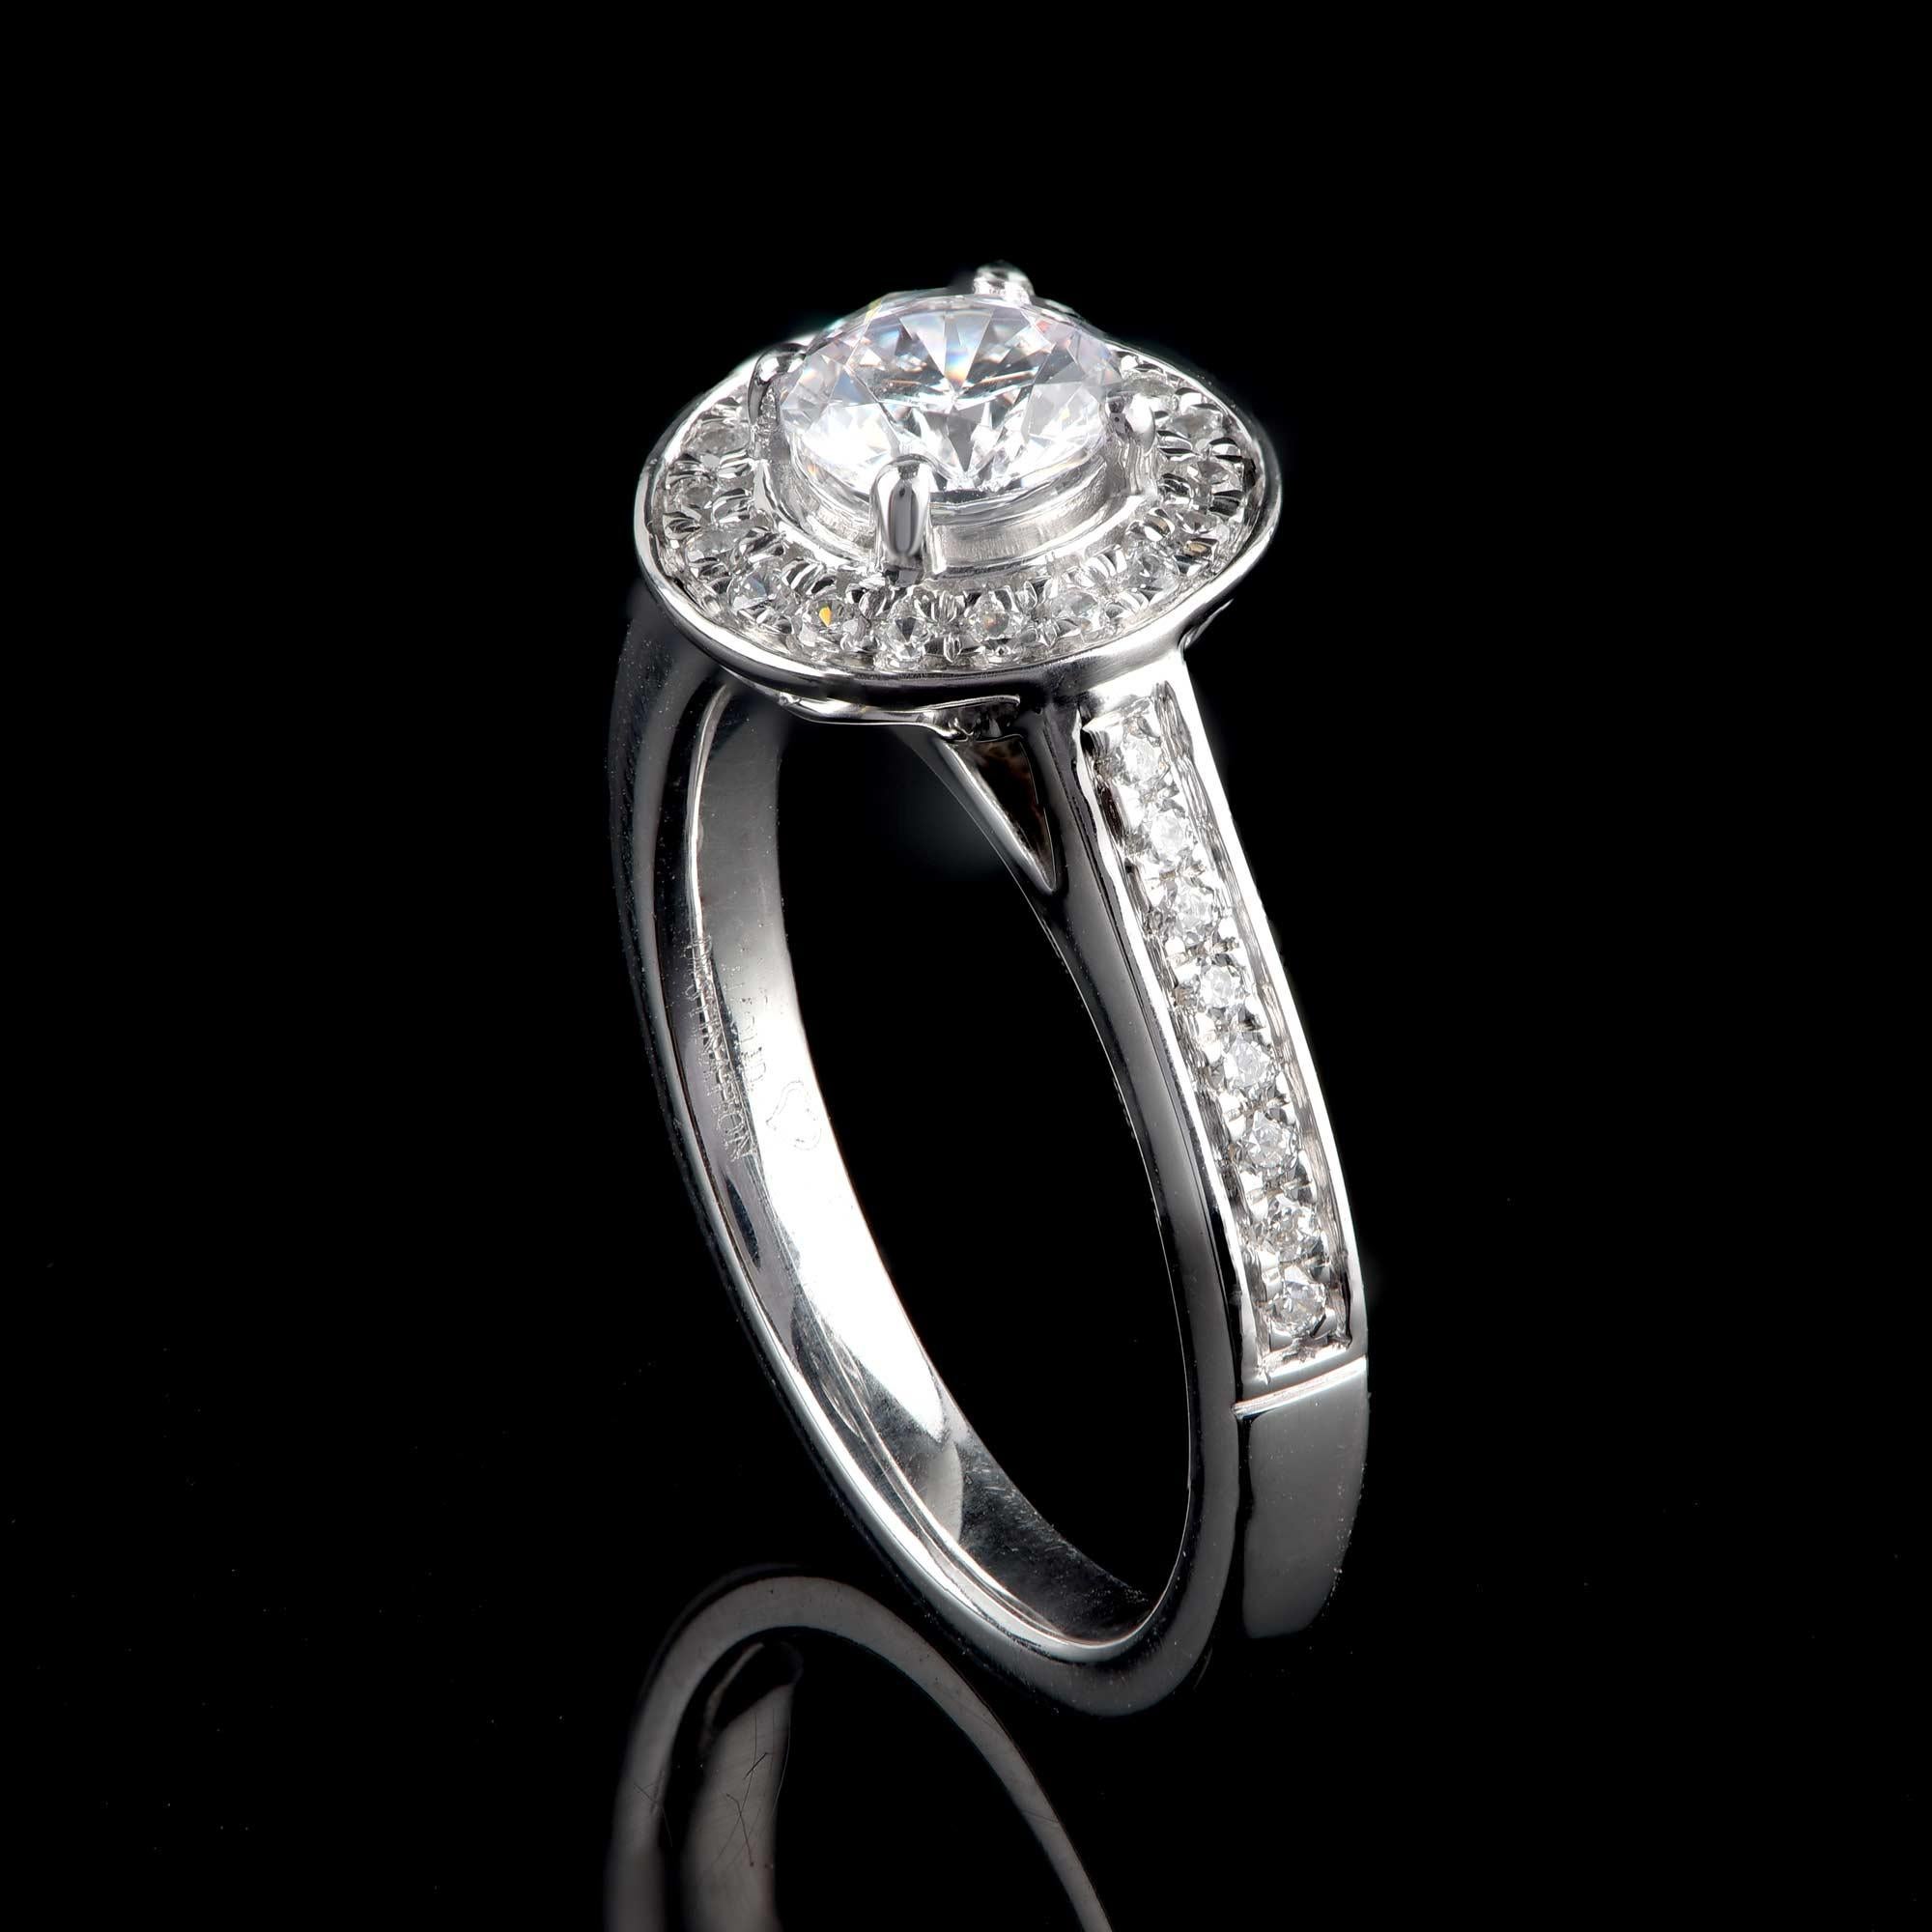 Expertly hand-crafted by our skillful craftsmen in 18-karat white gold and studded with 35 brilliant-cut diamonds and 1 GIA certified center stone in prong and micro-pave setting. The diamonds are graded H Color, SI1 Clarity. 

Metal color and ring